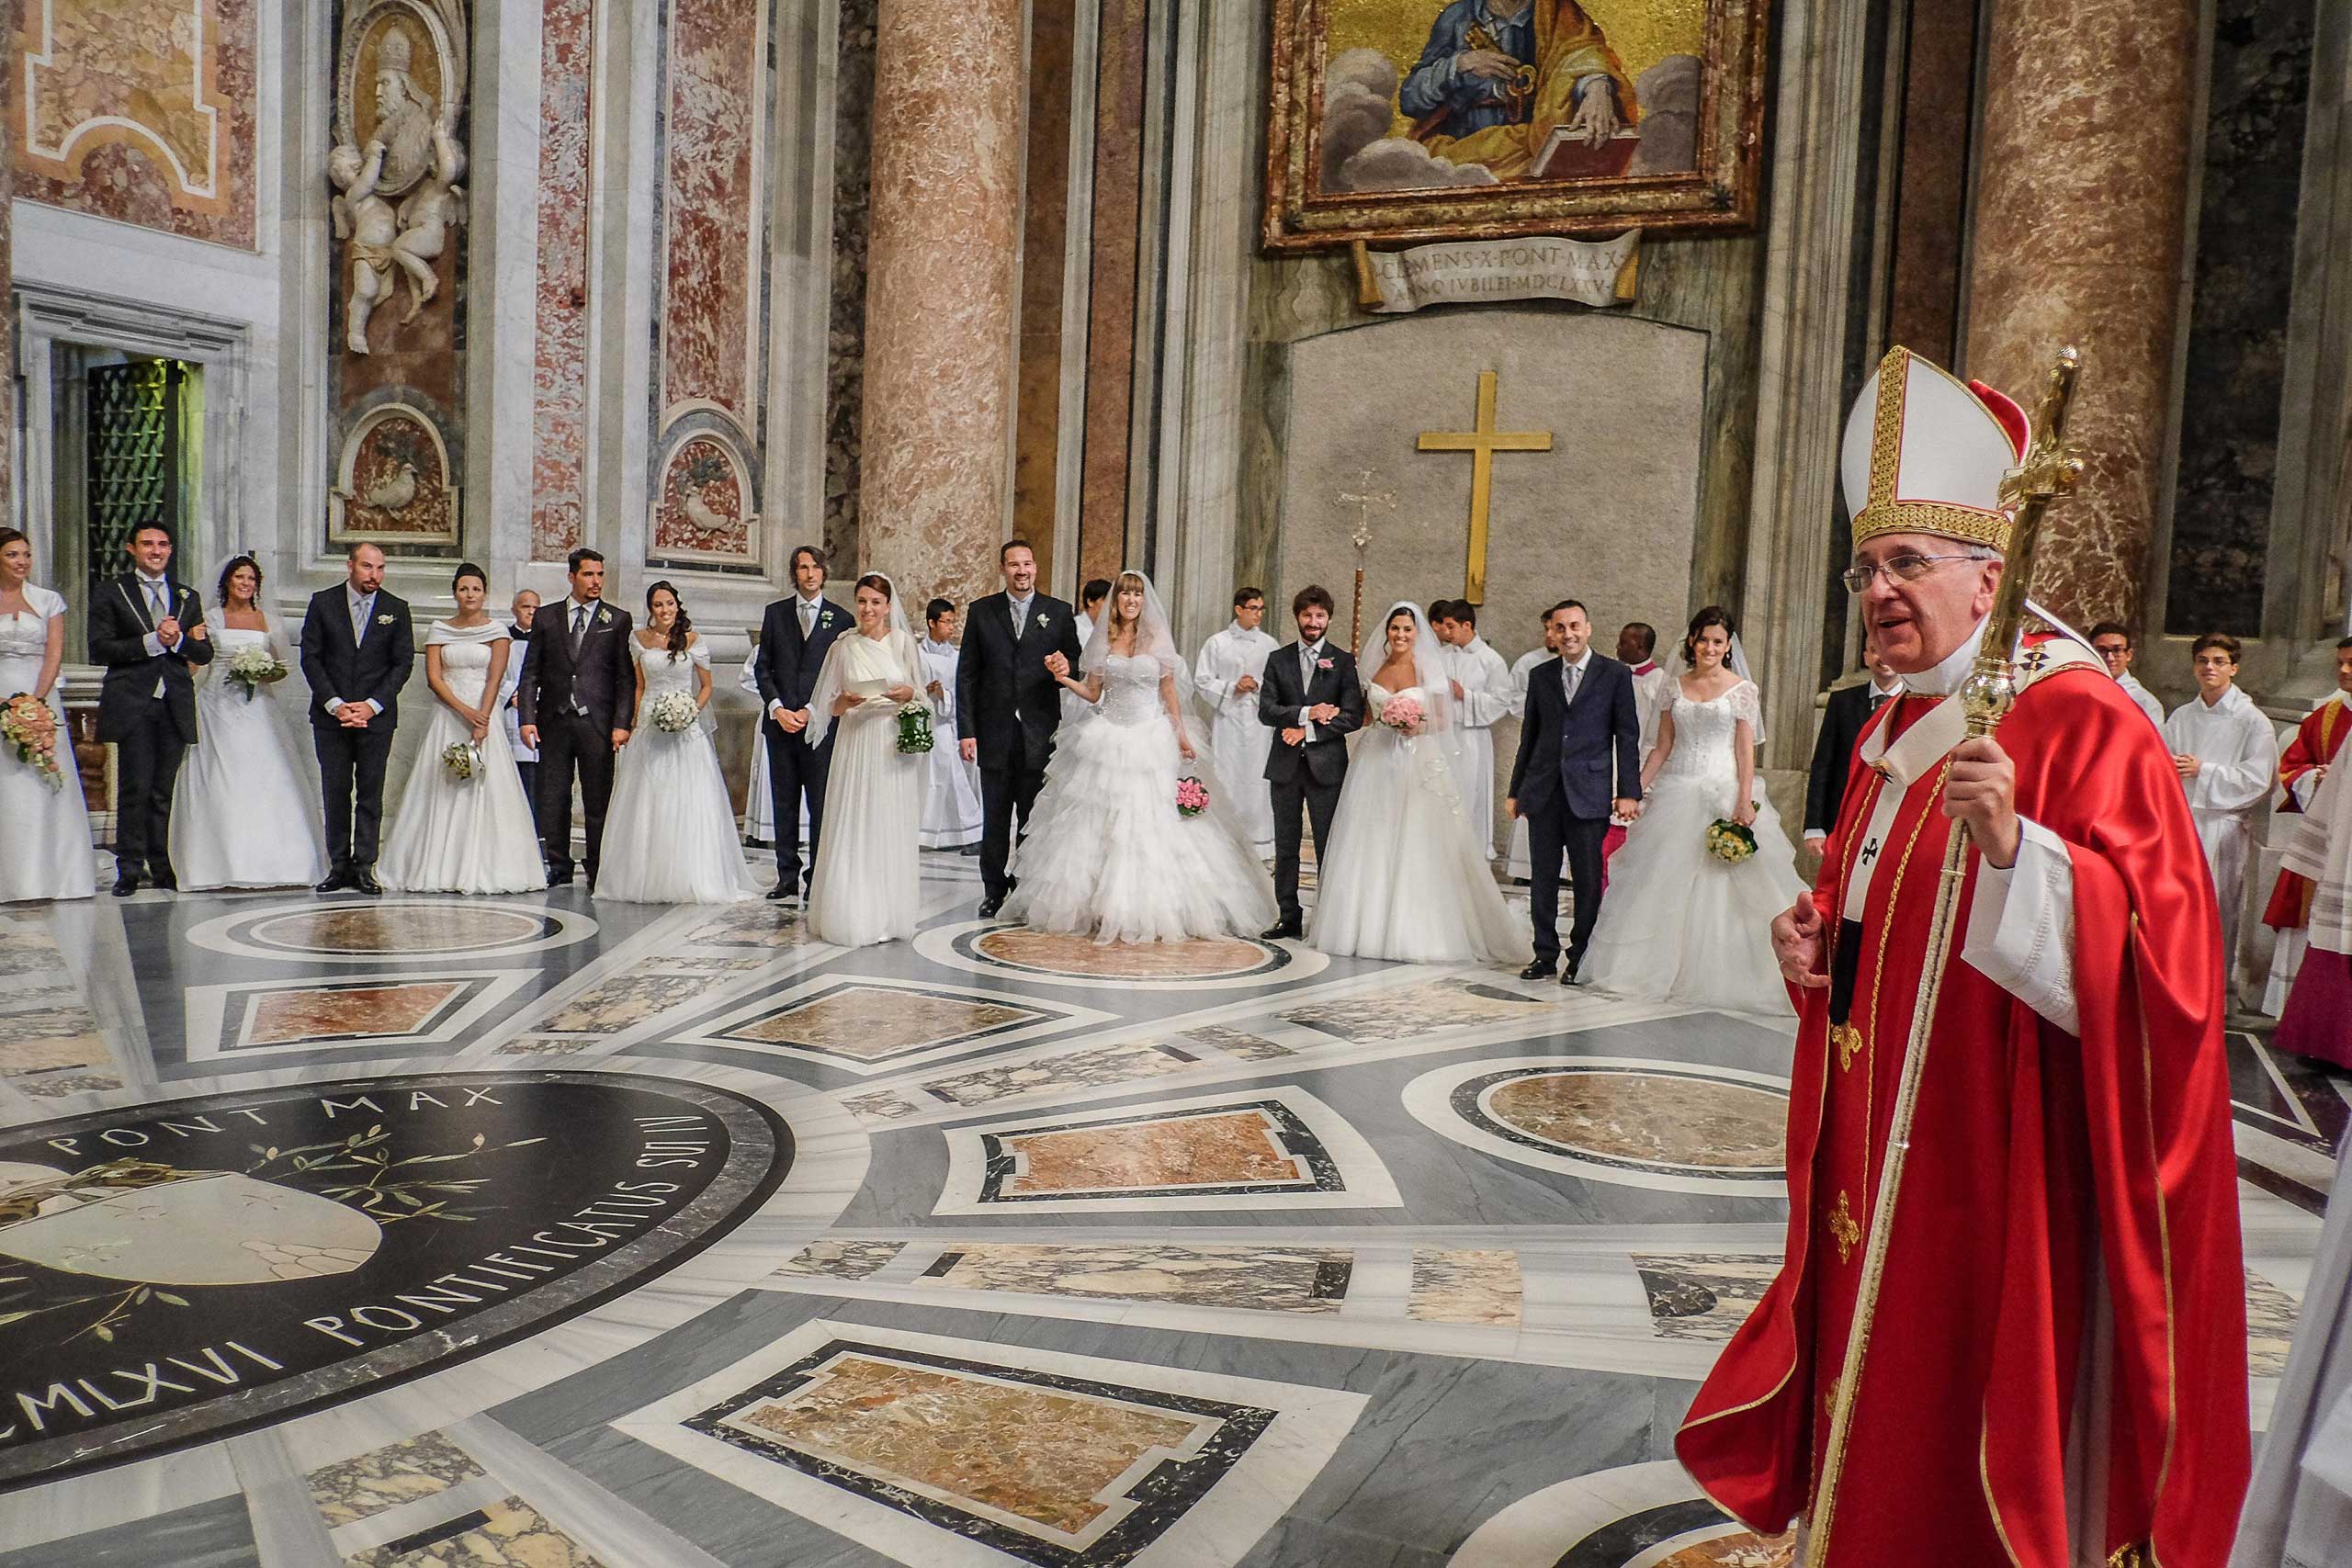 Sept. 14, 2014. Pope Francis celebrates the wedding of 20 couples in St. Peter's Basilica, Vatican City.